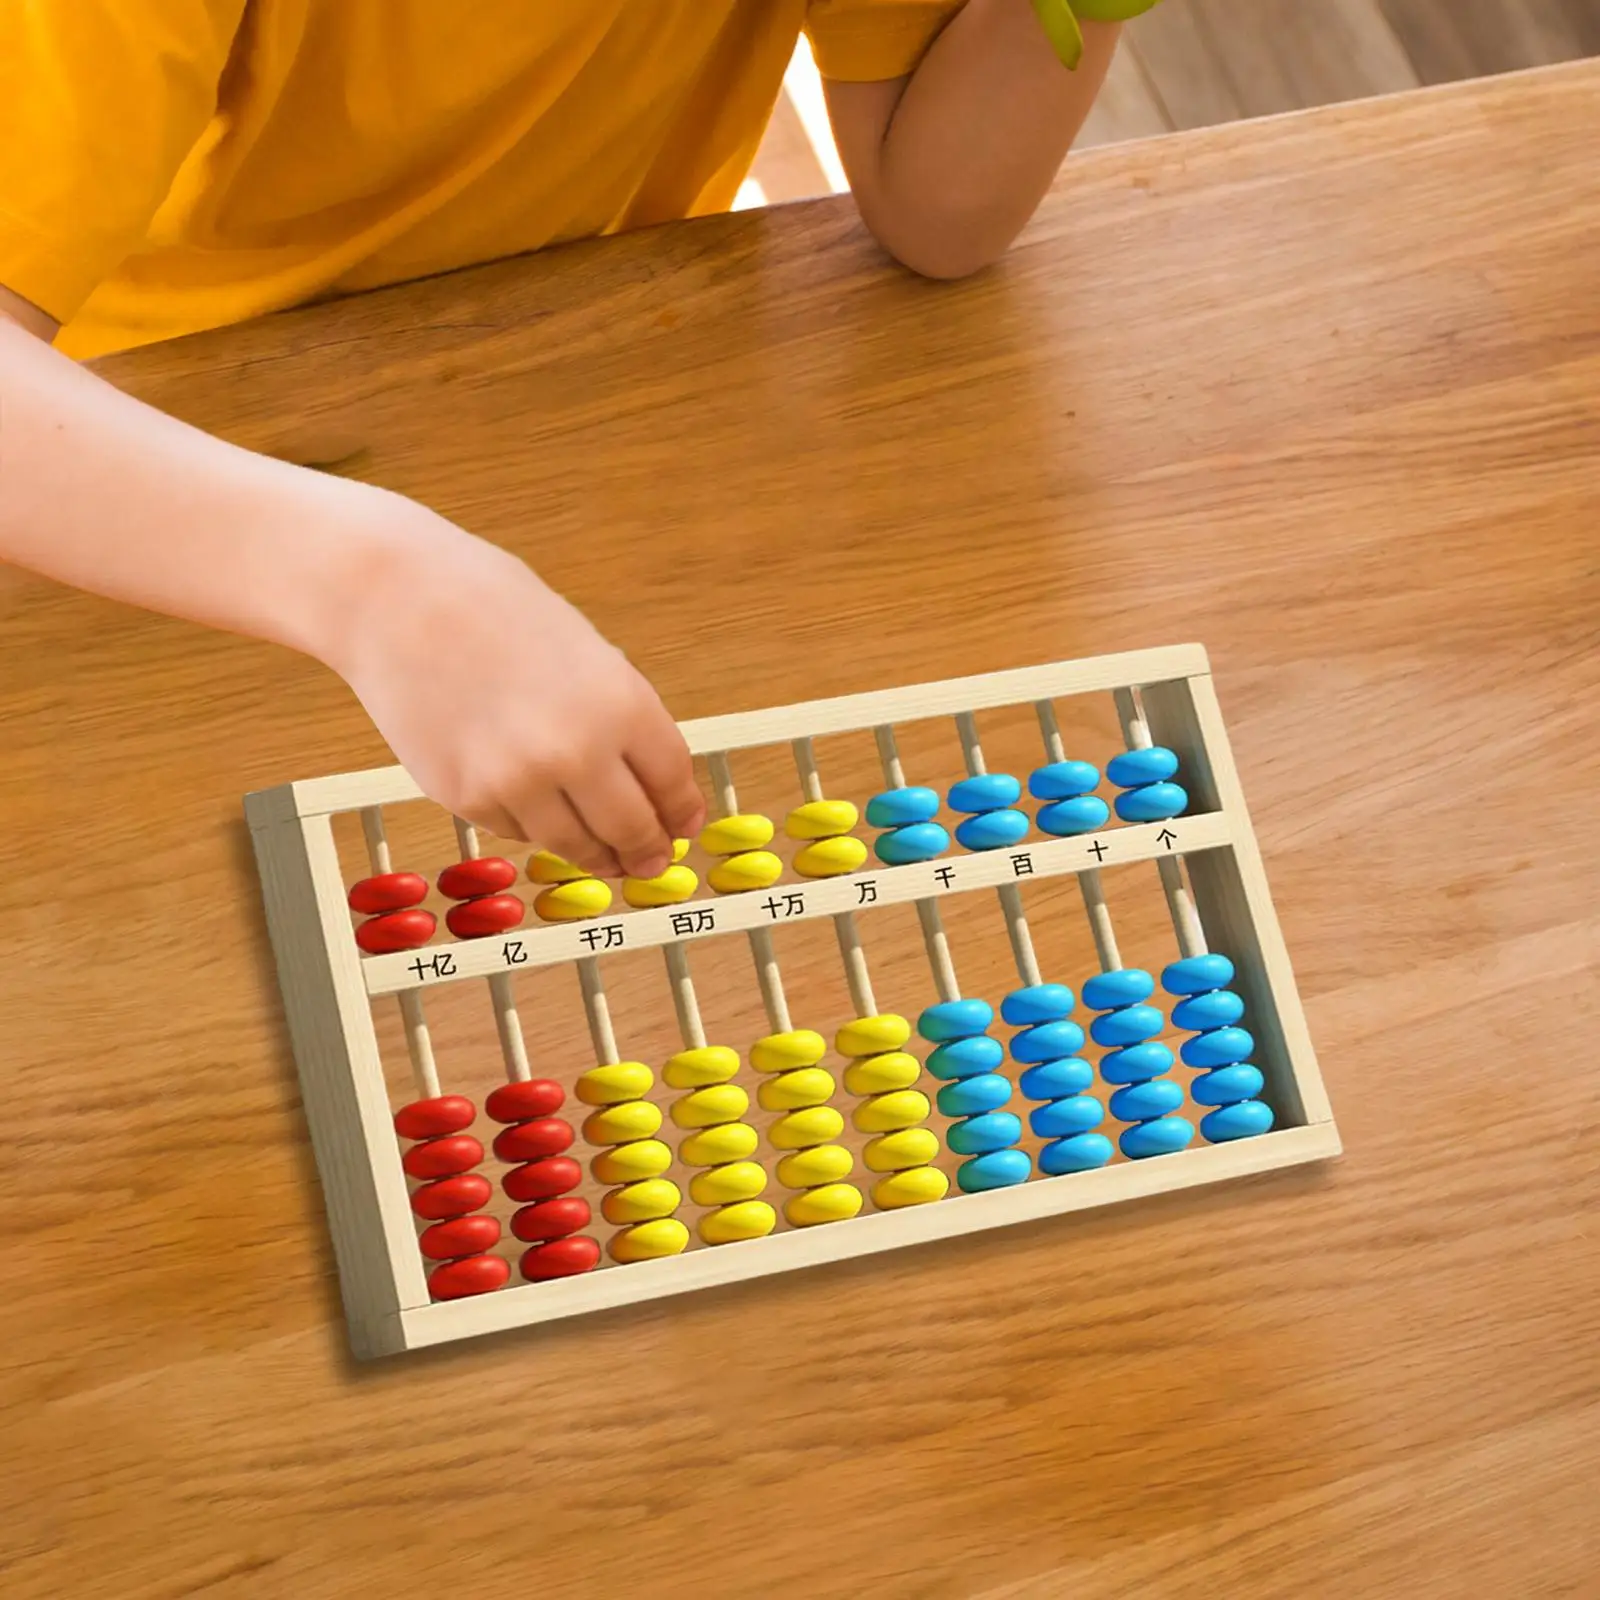 Wooden Abacus Educational Toy Calculating Tool for Early Childhood Education